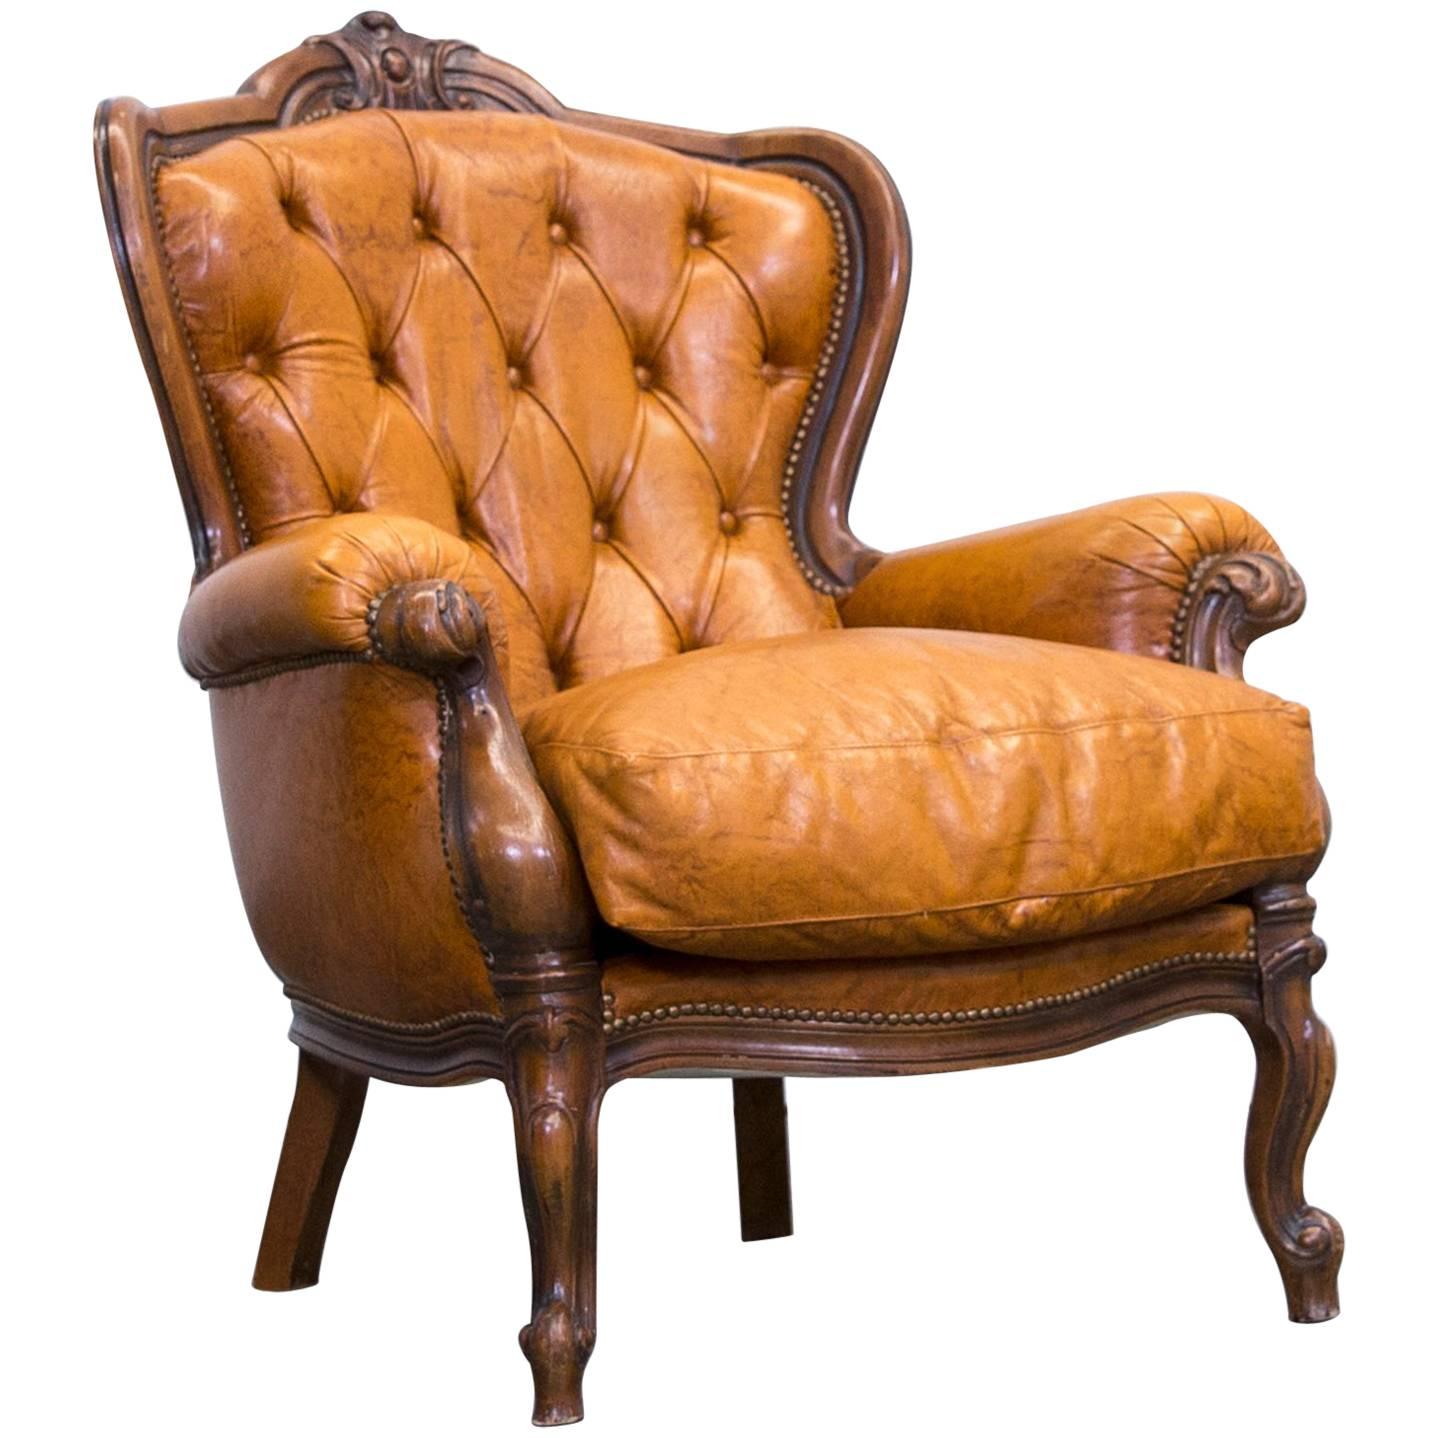 Chesterfield Leather Armchair Cognac Brown One-Seat Couch Wood Retro Vintage